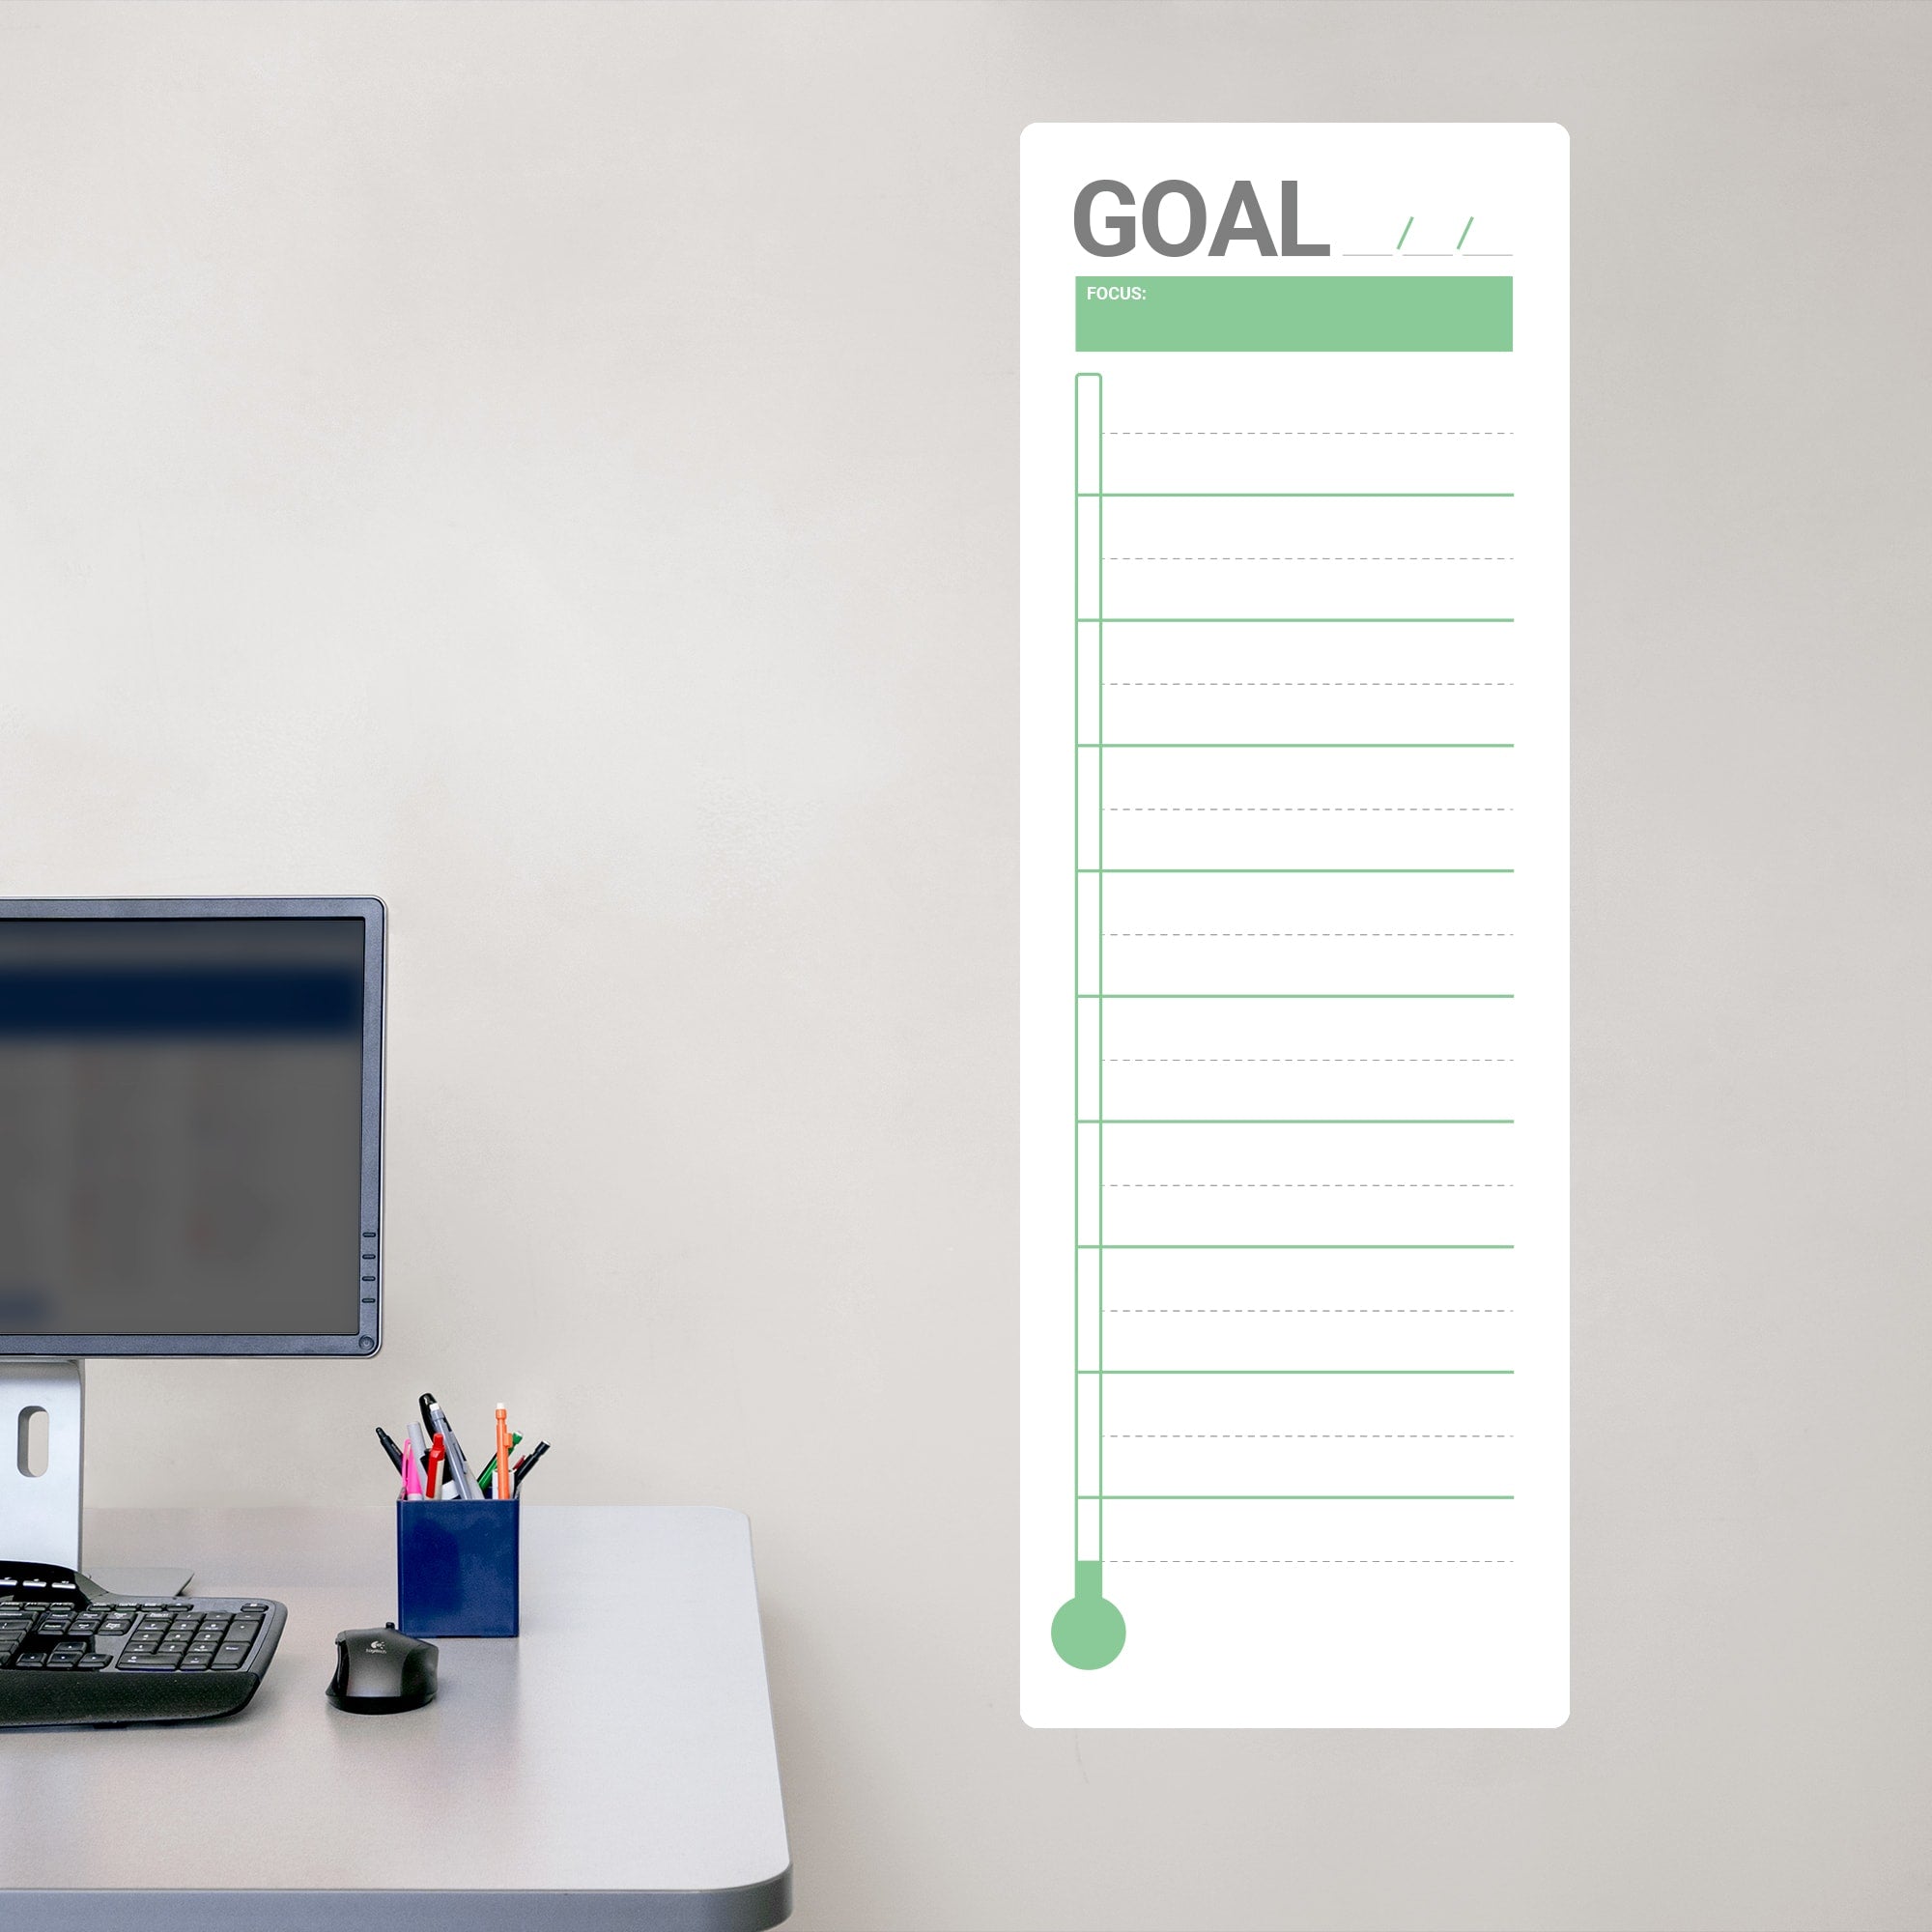 Goal Thermometer: Minamalist Design - Removable Dry Erase Vinyl Decal in Green (42"W x 14"H) by Fathead